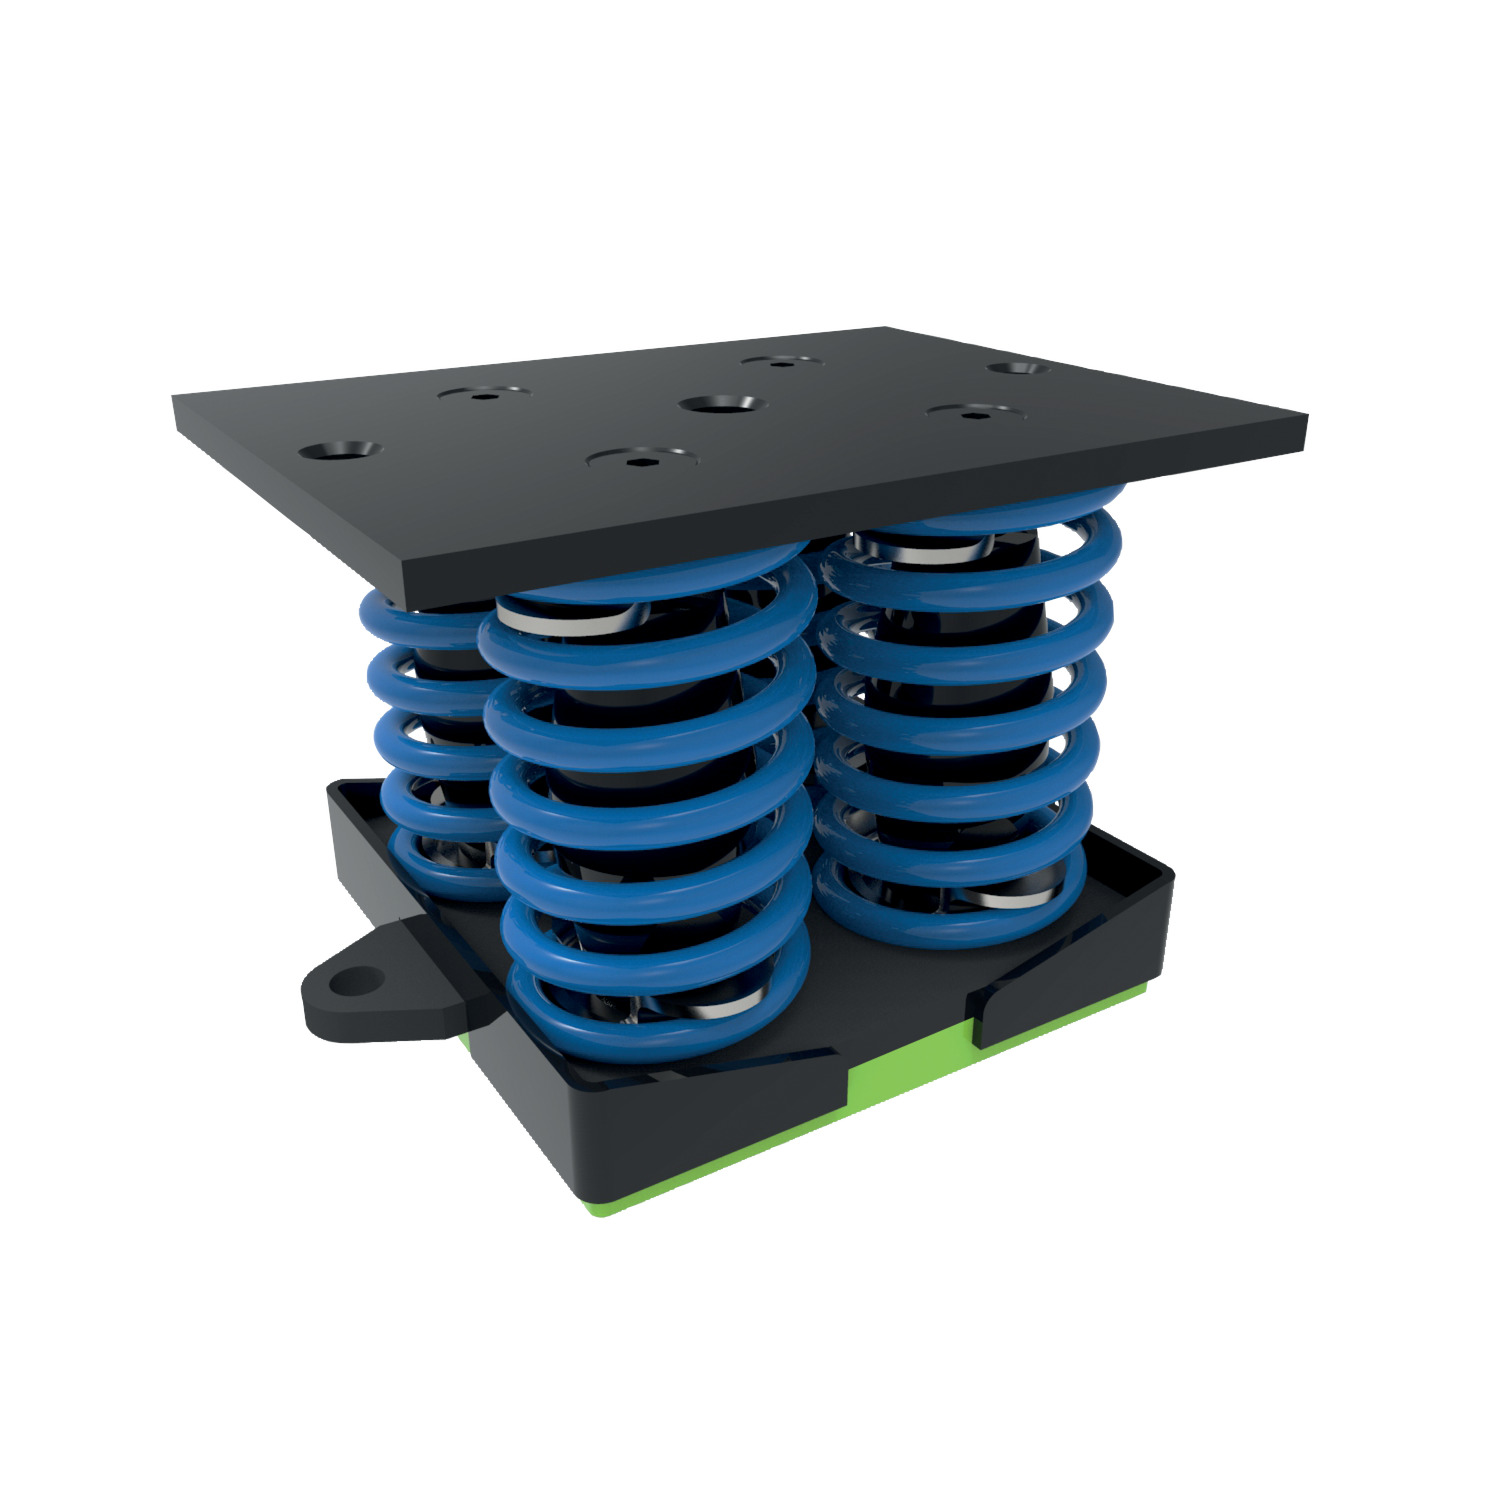 Spring Vibration Damper four spring The sylomer mat that these dampers incorporate, isolates the mid-high frequency vibrations which are transmitted through the coils of the metal springs.